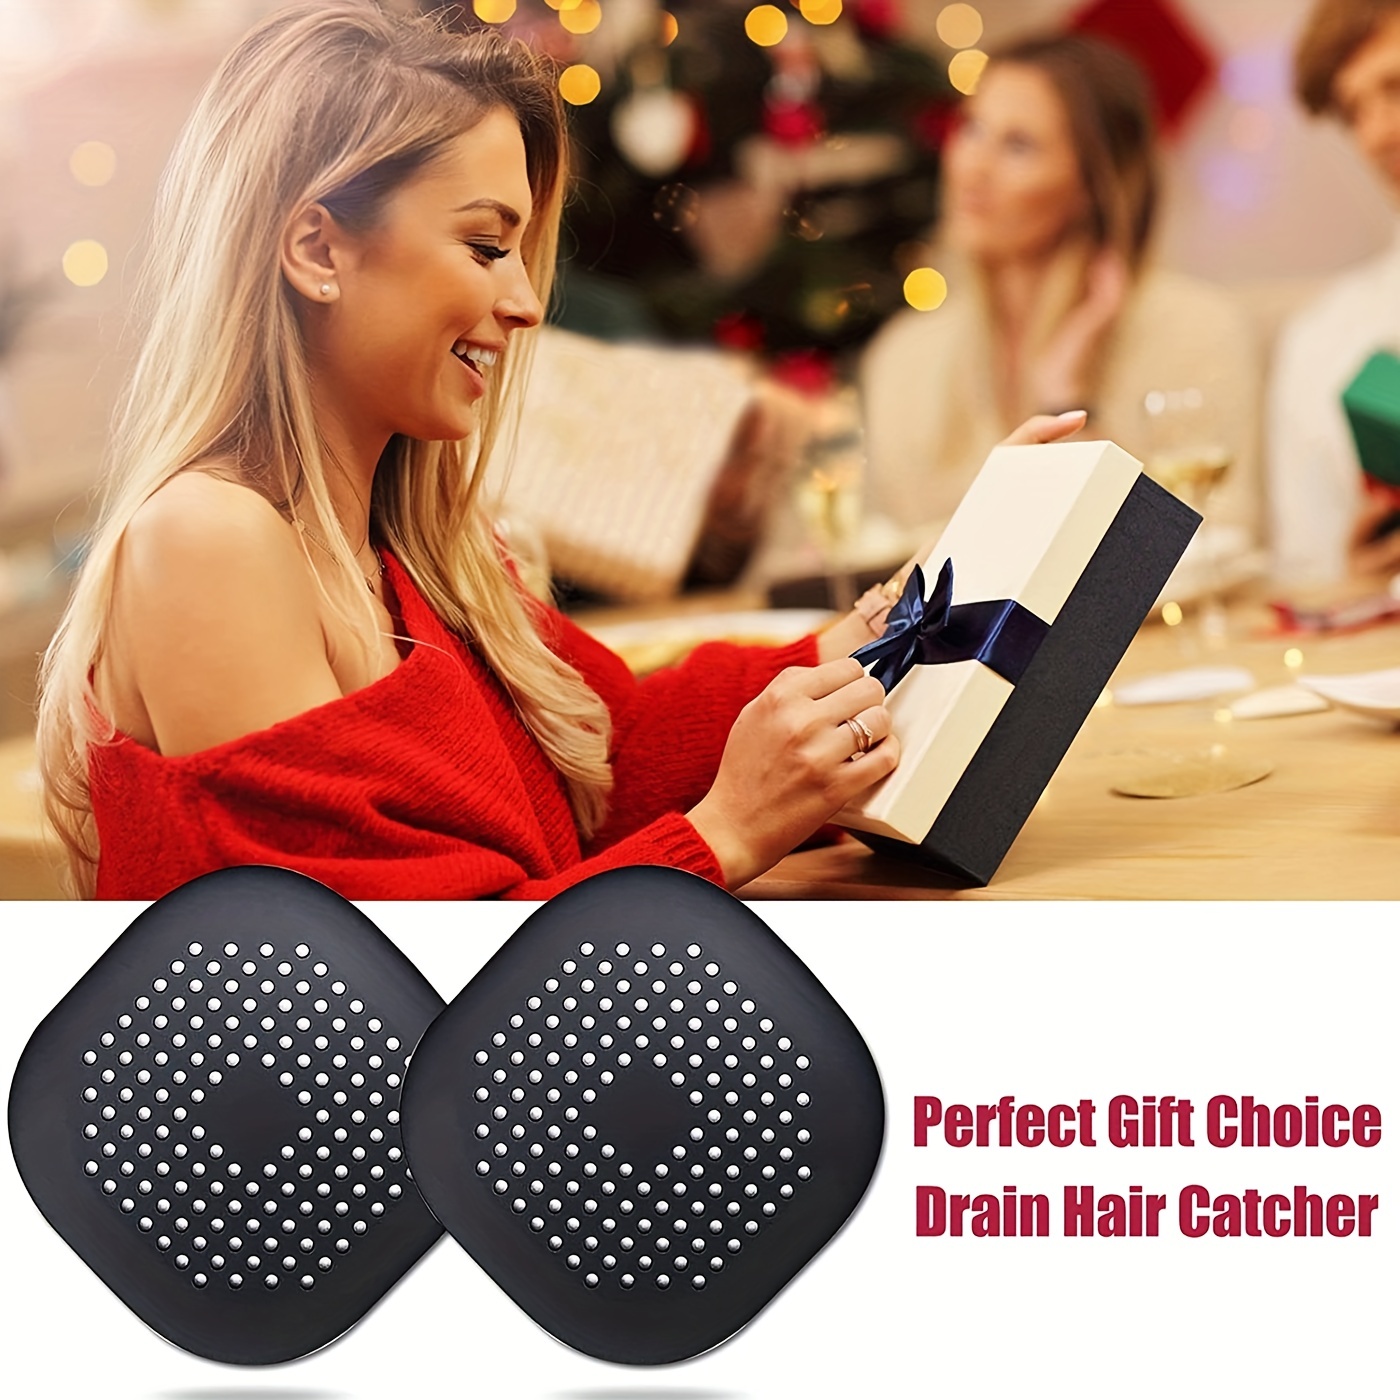 1pc Drain Hair Catcher With Suction Cup, Durable Silicone Square